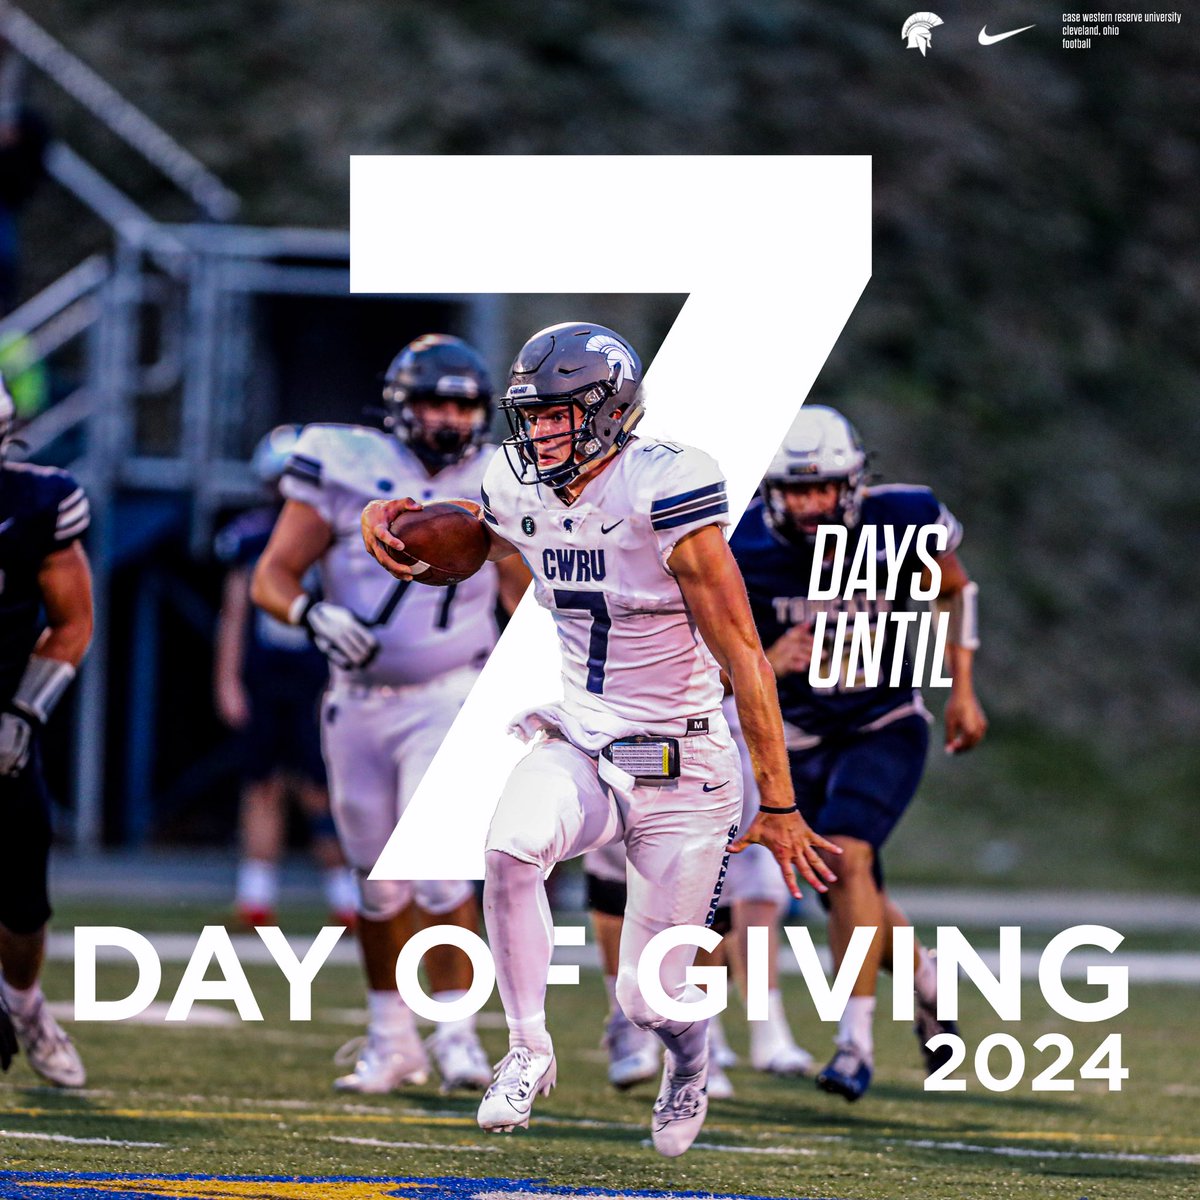 𝟕 𝐝𝐚𝐲𝐬 𝐮𝐧𝐭𝐢𝐥 𝐭𝐡𝐞 𝐃𝐚𝐲 𝐨𝐟 𝐆𝐢𝐯𝐢𝐧𝐠! Stay tuned for more information about the Day of Giving on April 10th! #d3fb #BlueCWRU #RollSpartans